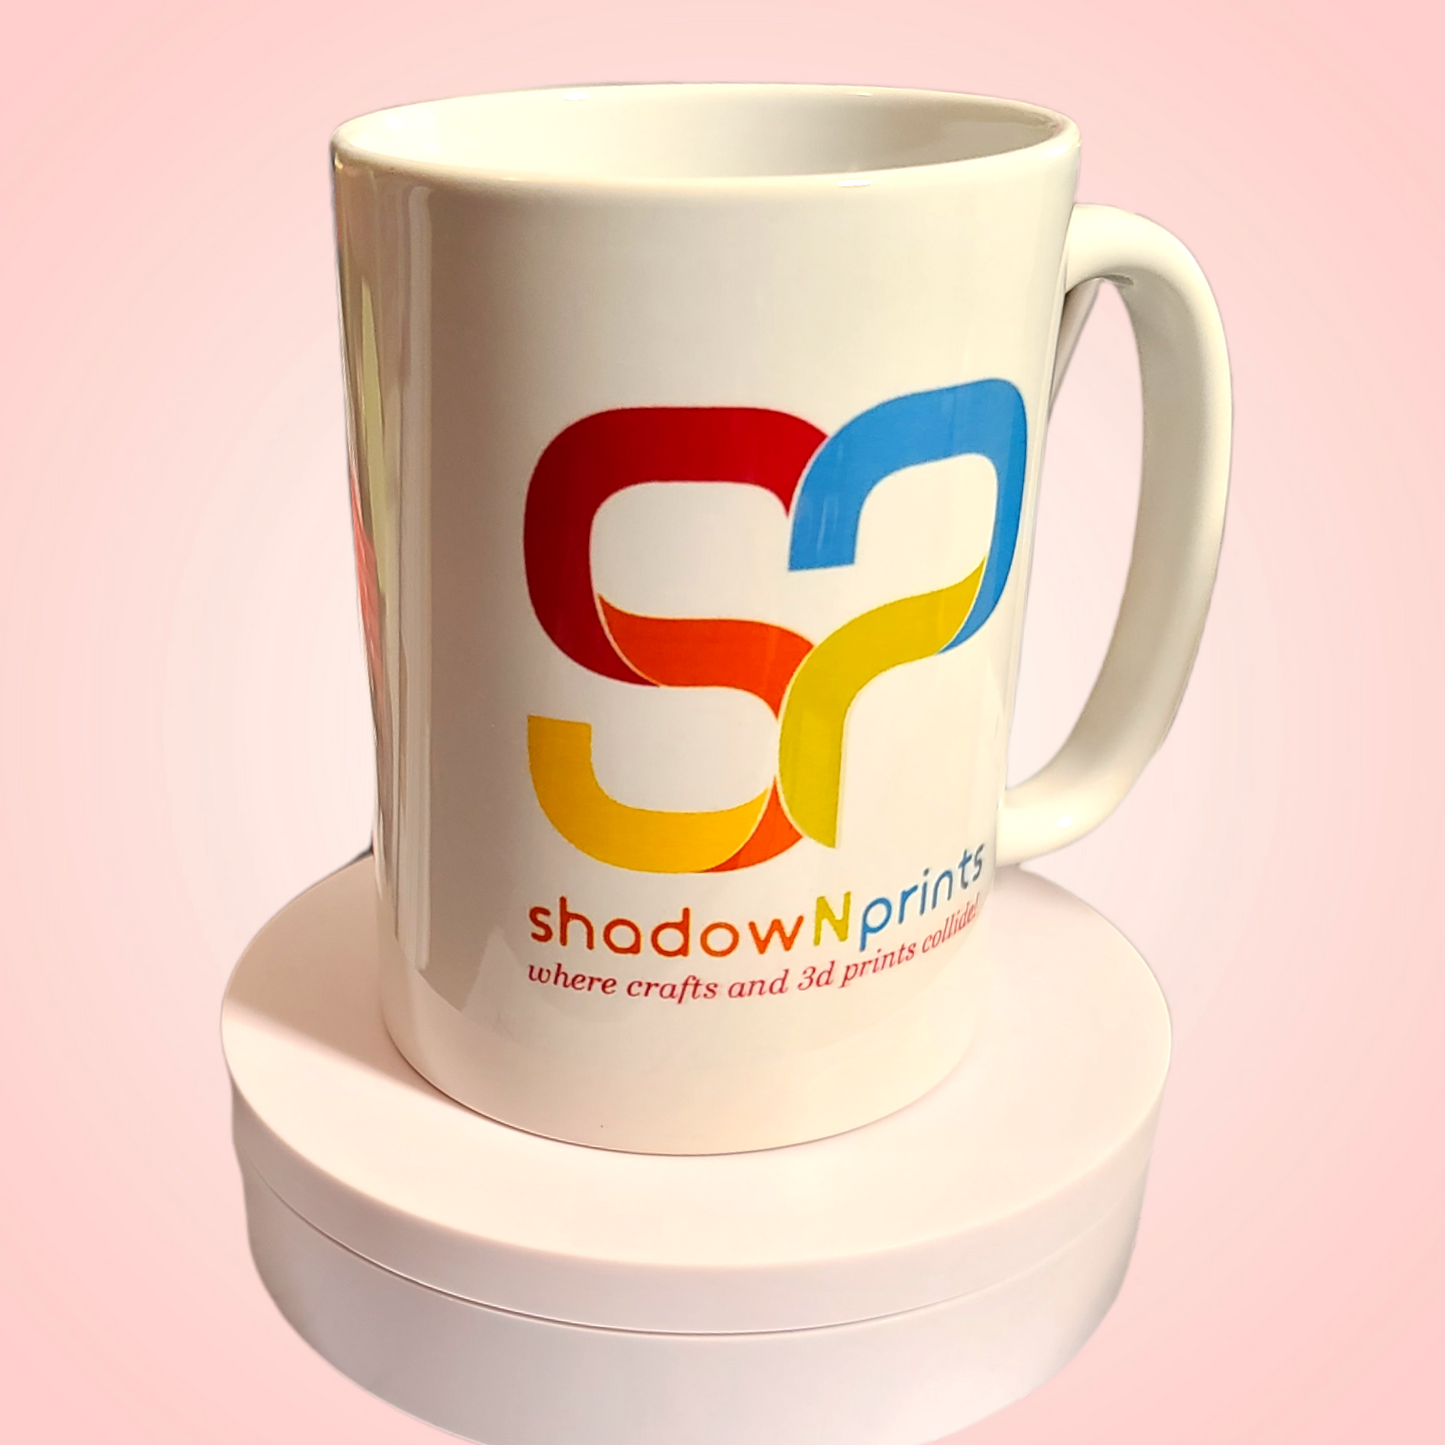 Customized mug upon customer request. Personalized coffee cup. Create your own teacup for a gift. drinkware